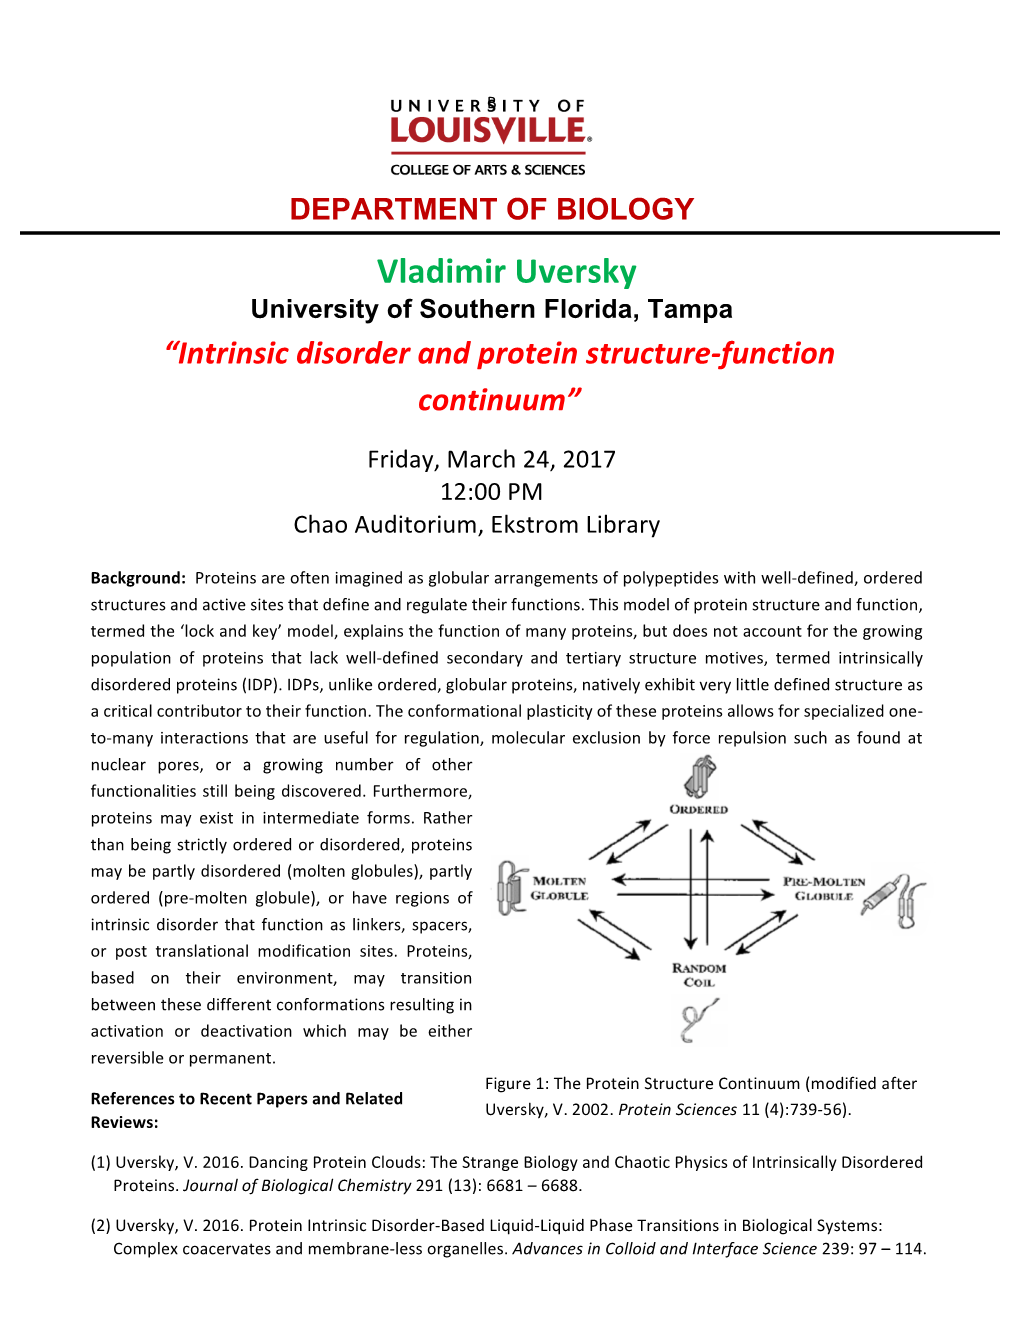 DEPARTMENT of BIOLOGY Vladimir Uversky University of Southern Florida, Tampa “Intrinsic Disorder and Protein Structure-Function Continuum”